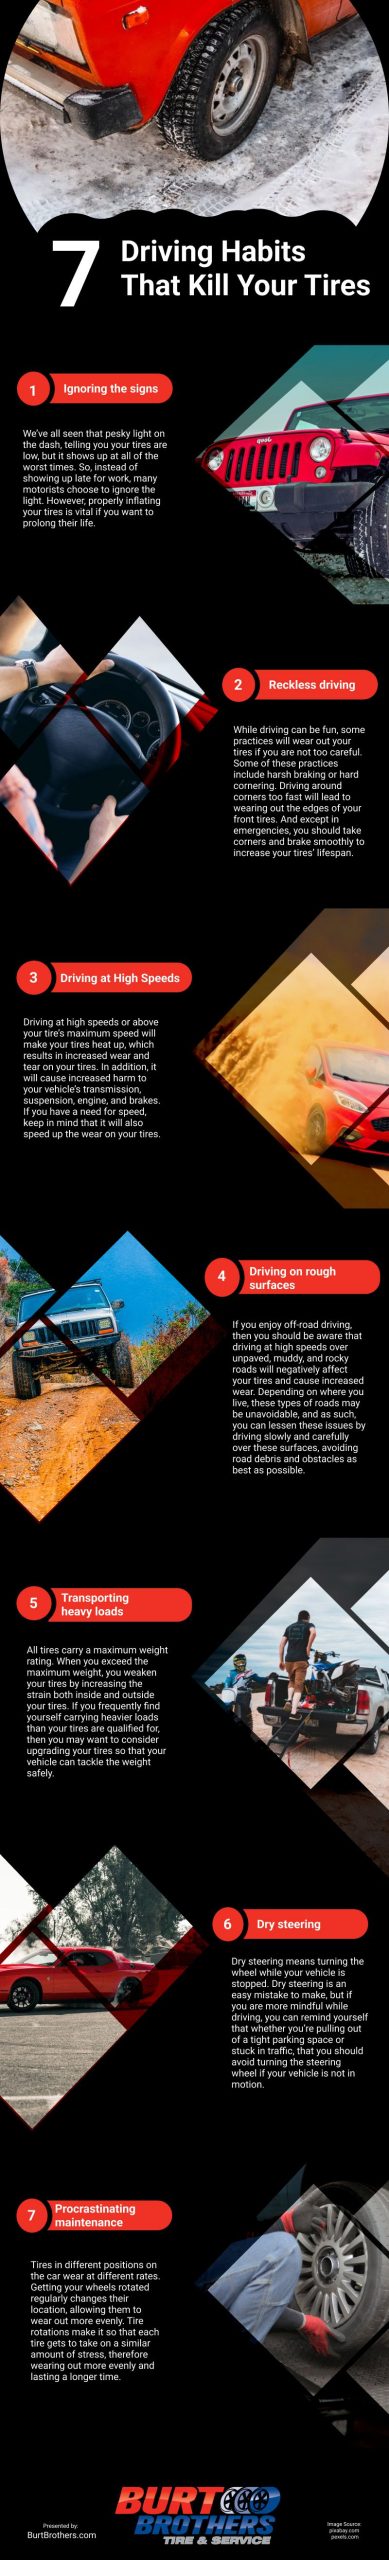 7 Driving Habits That Kill Your Tires Infographic